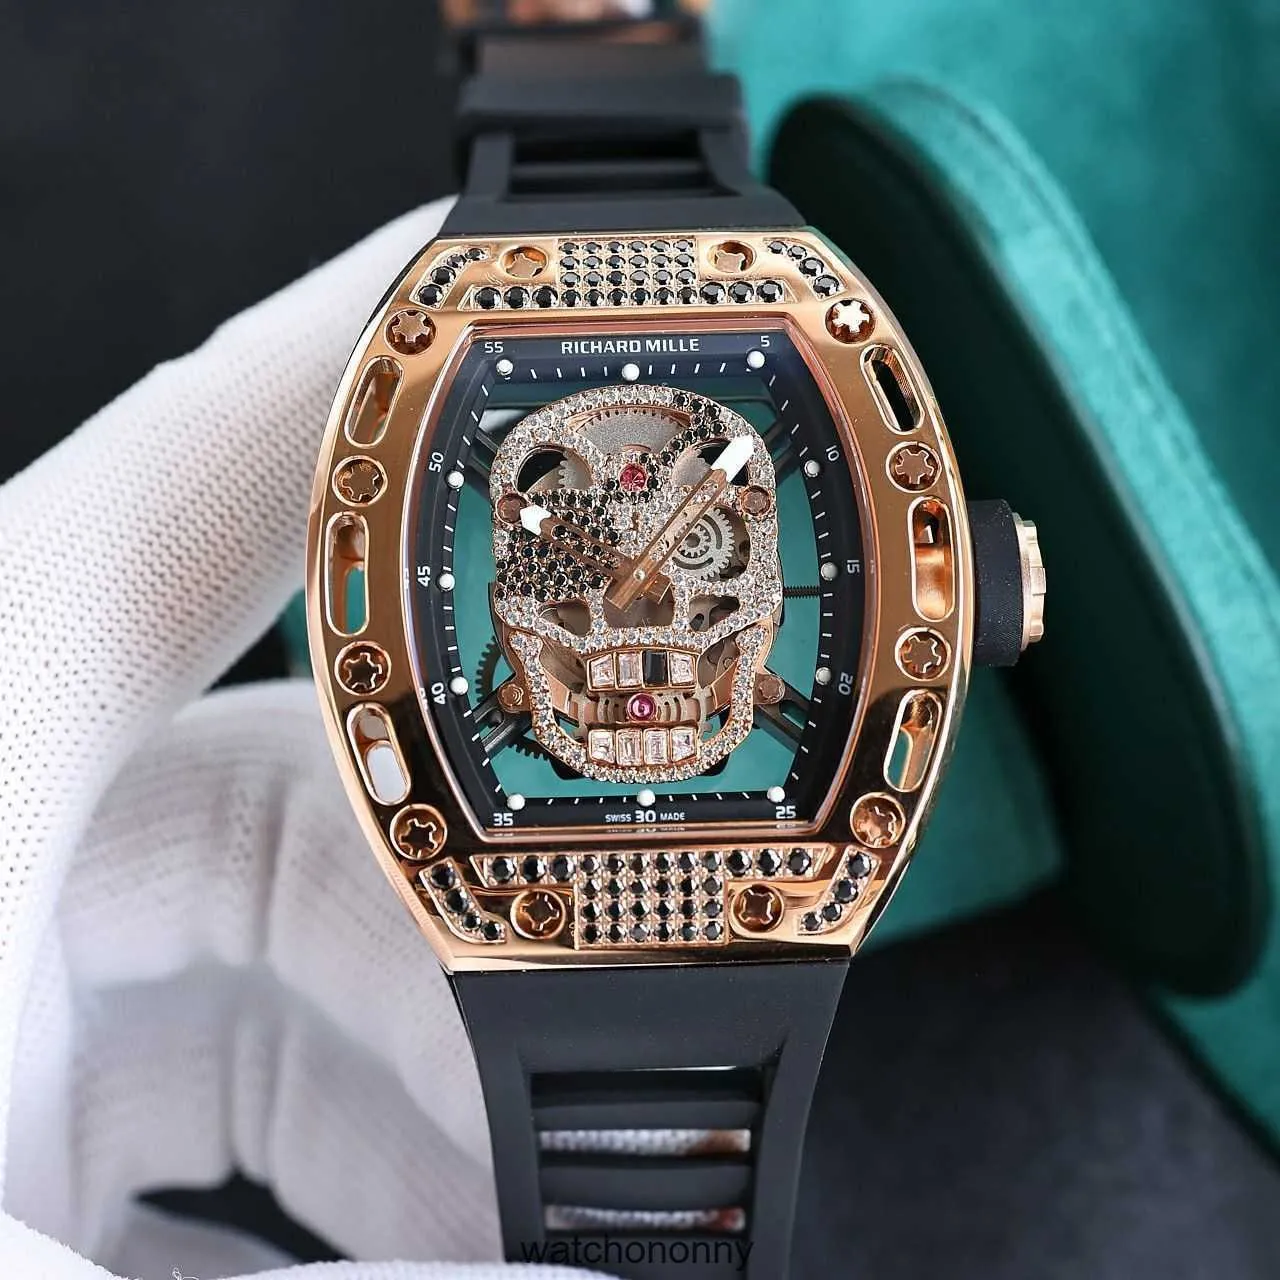 Mens Richa Luxury Mechanical Watch Watches Milles för RM052 Ghost Classic Legendary Hollow Skull Wrist with Diamond Hegemony Rubber Band